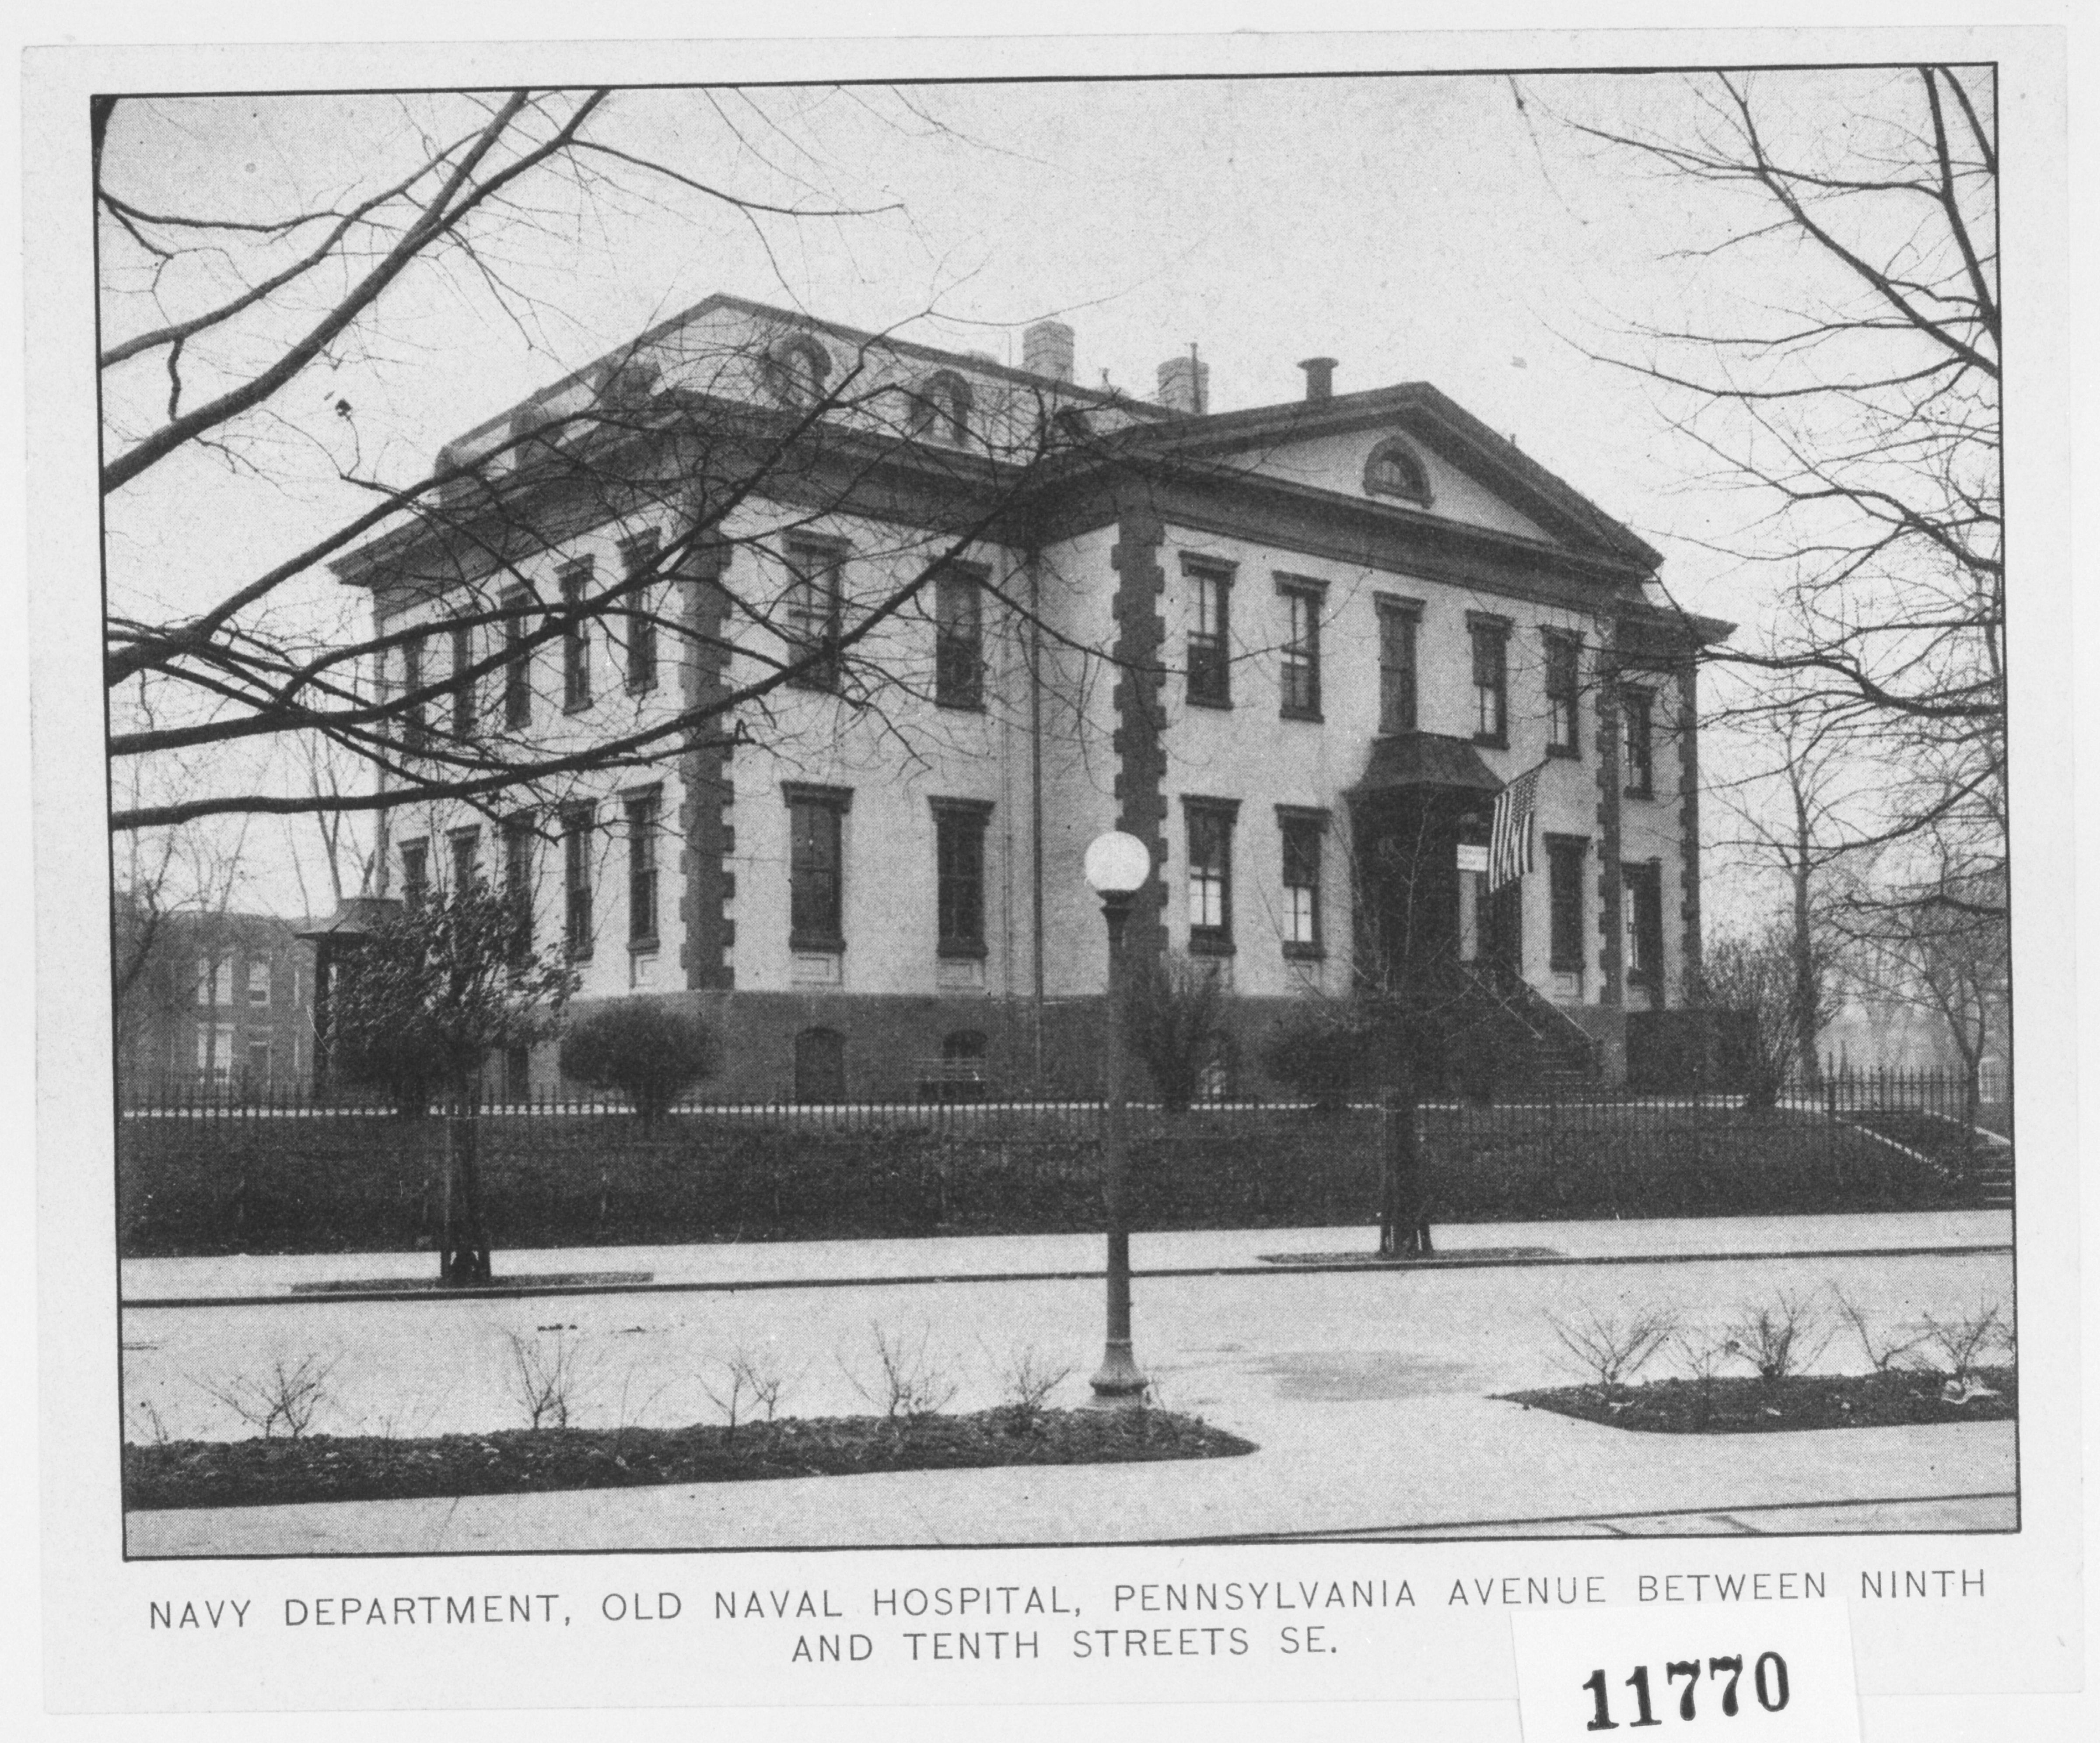 Undated photograph of the of the Old Naval Hospital from the Northeast